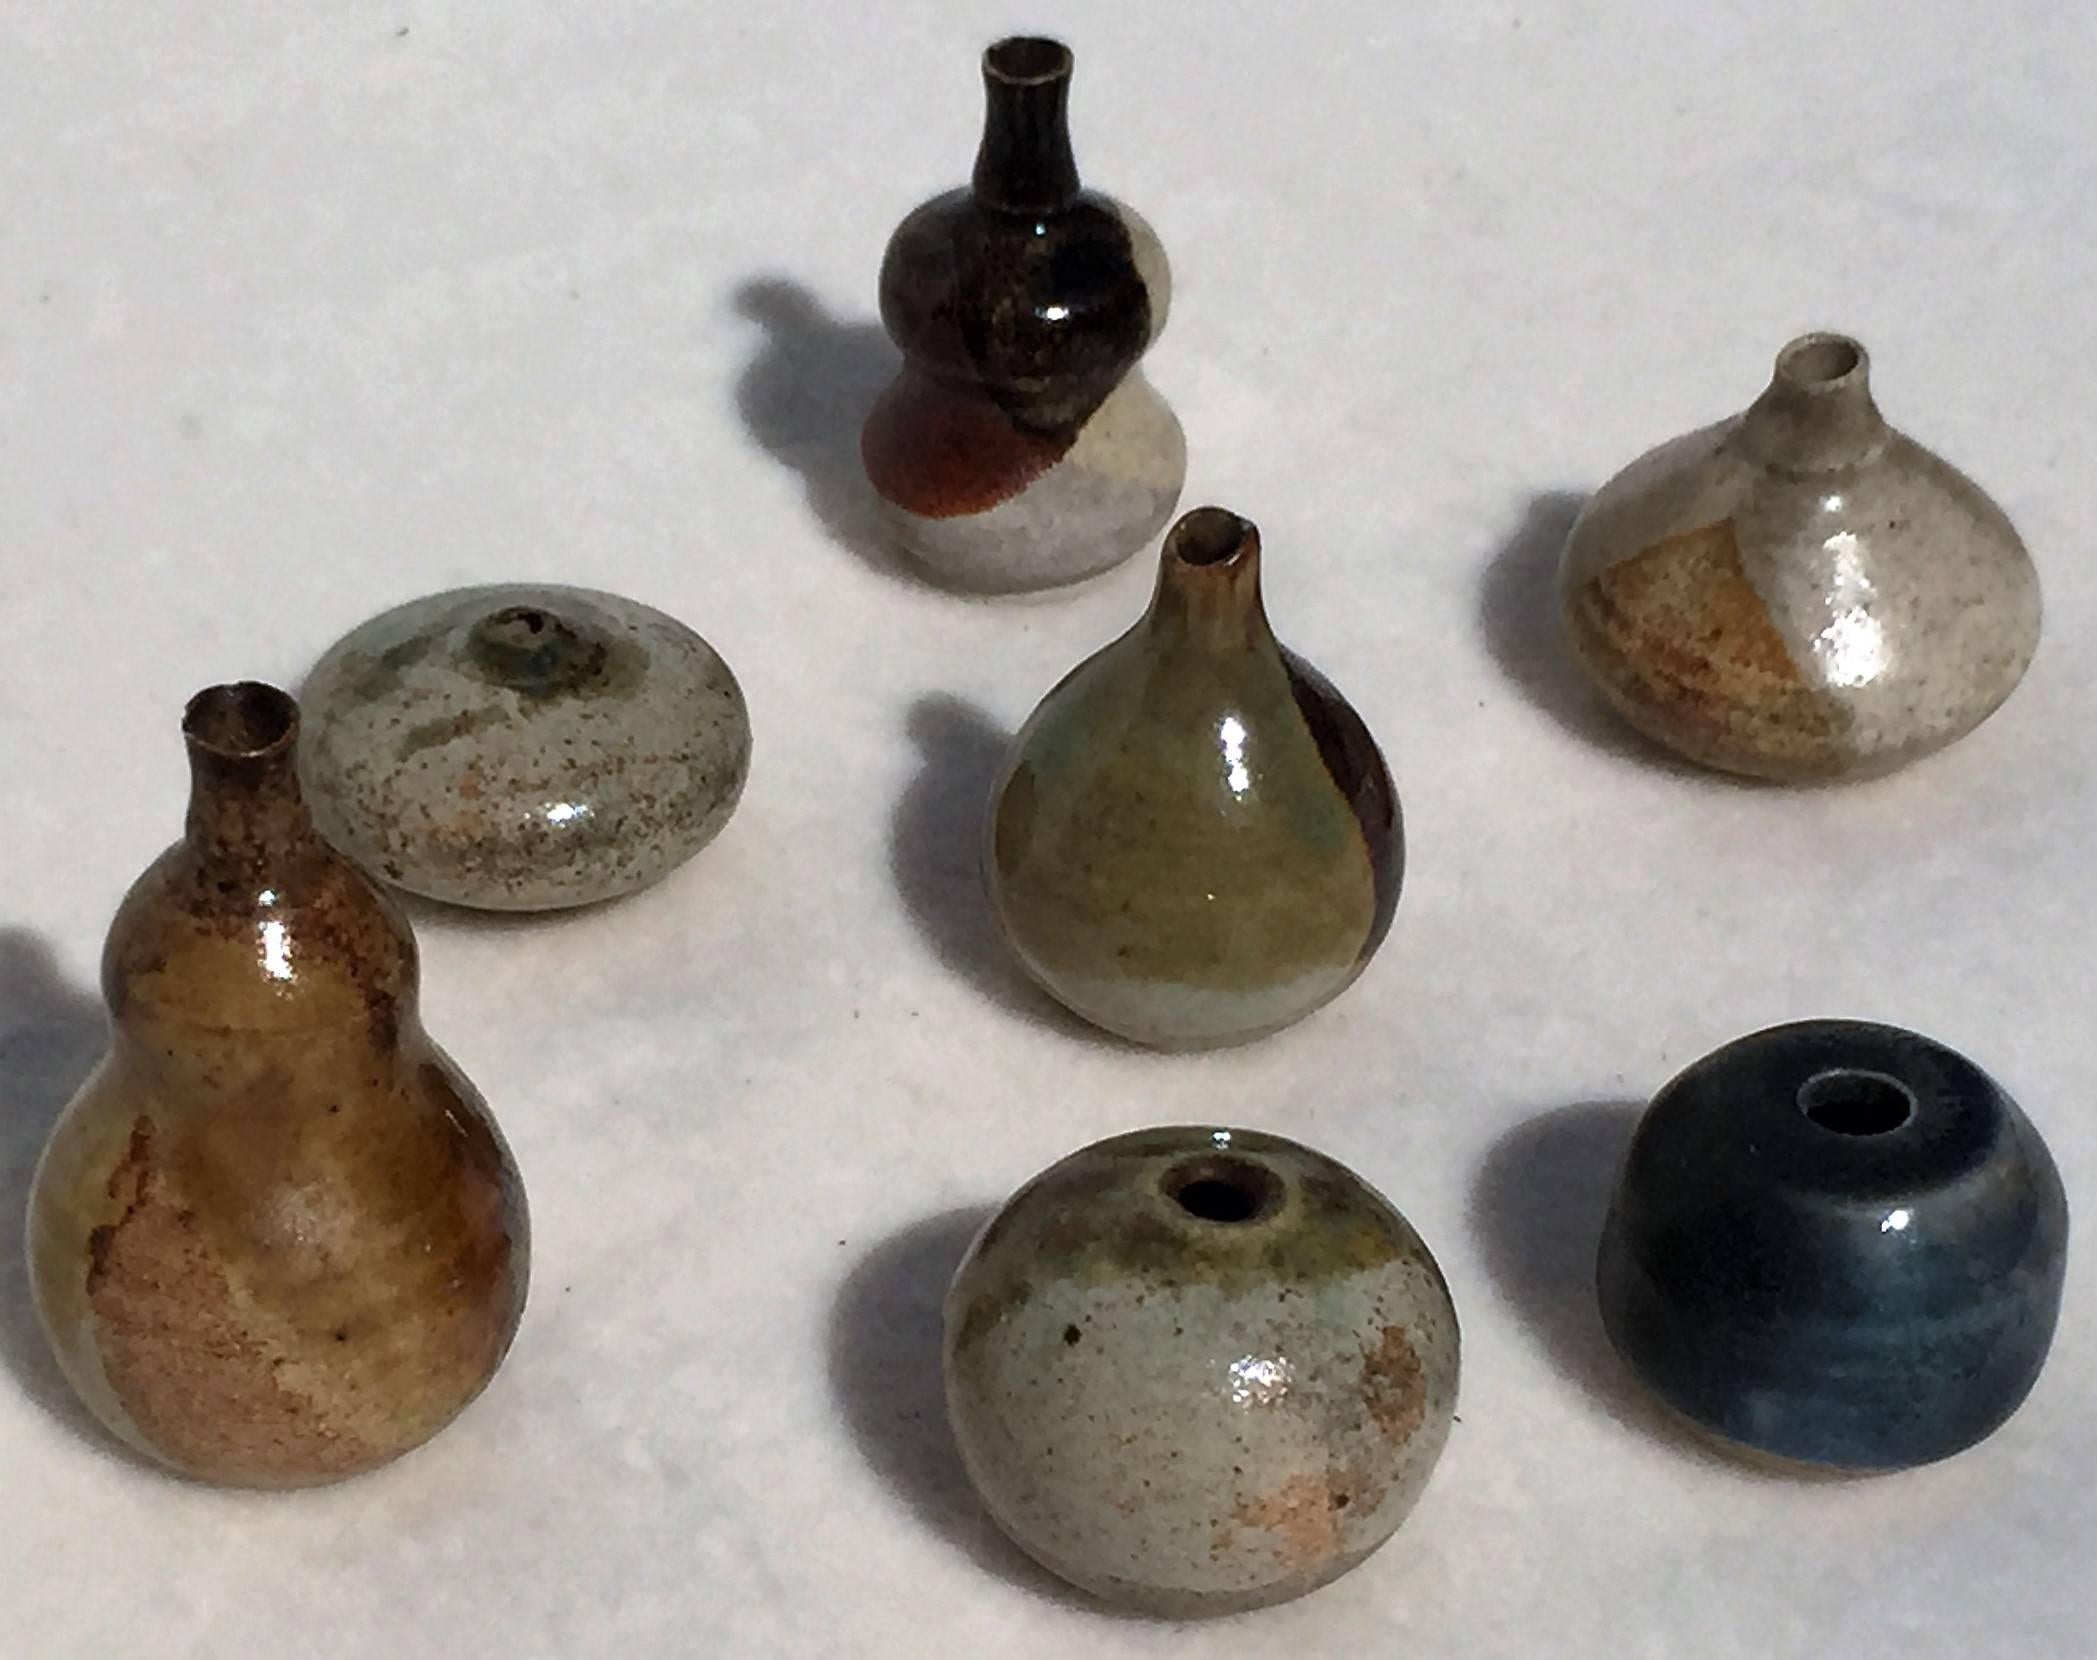 A set of seven tiny turned Miniature vases. In brown, blue, green glaze. Fruit and spherical shaped. Signed underneath TS. From the village of Art pottery Höhr- Grenzhausen, Westerwald, Germany, 1960s.
The largest one is 2.24''/ 5.7 cm high, Ø